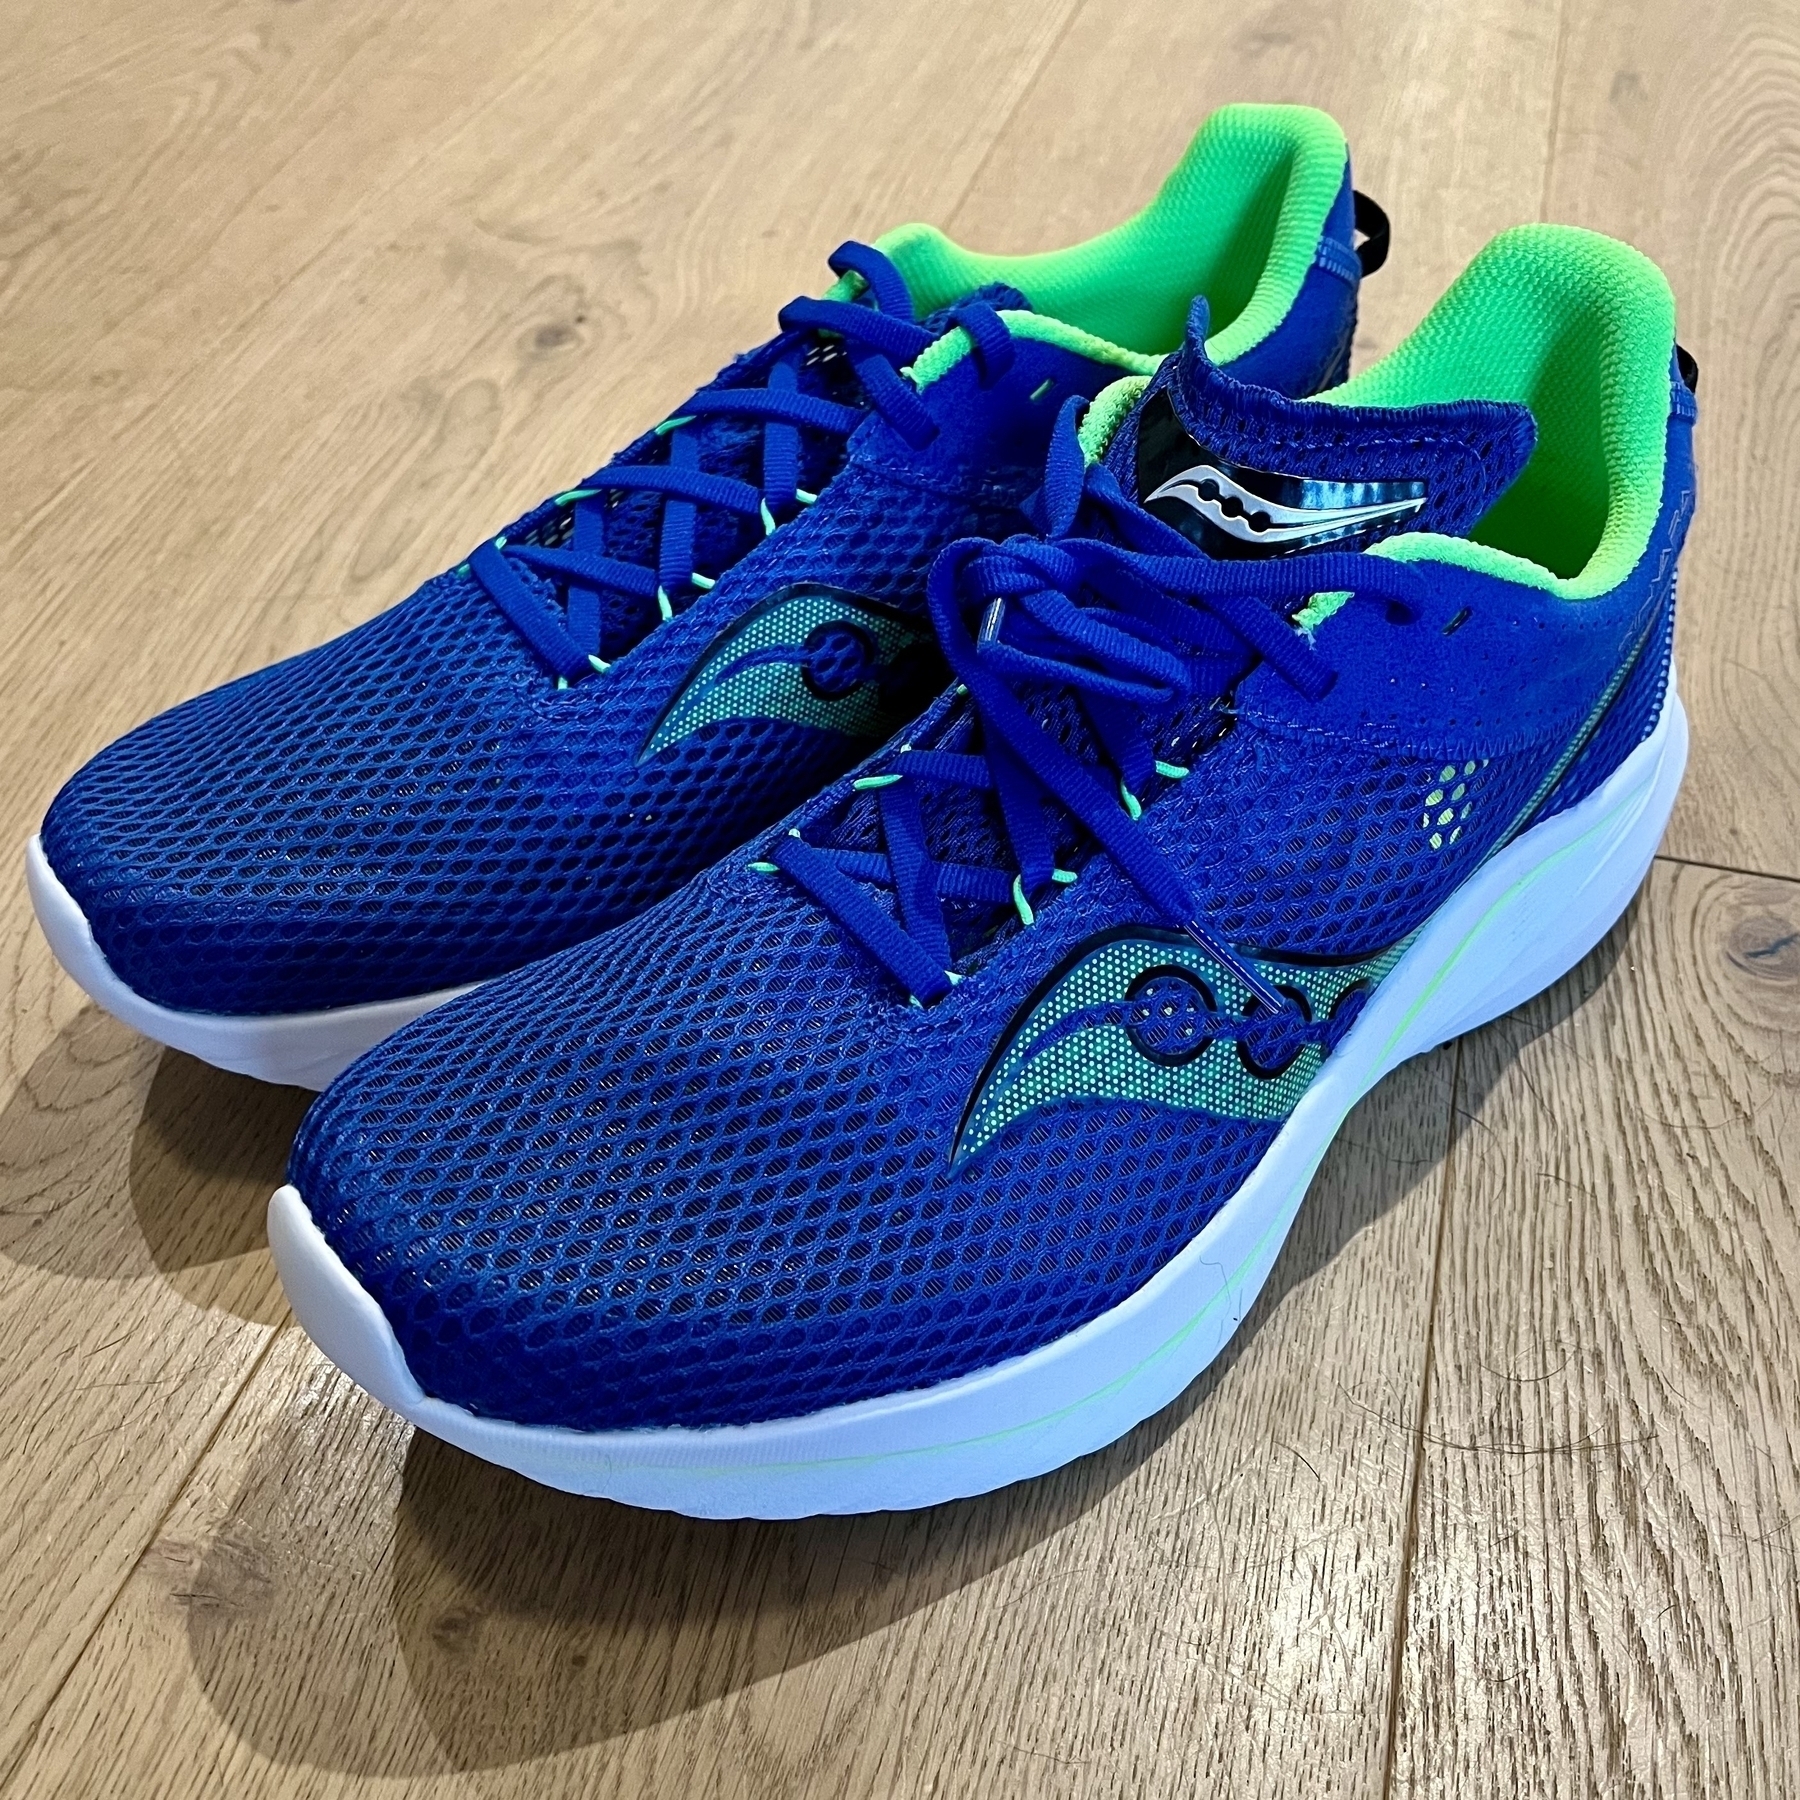 A pair of blue running shoes with neon green interior rests on a wooden floor.